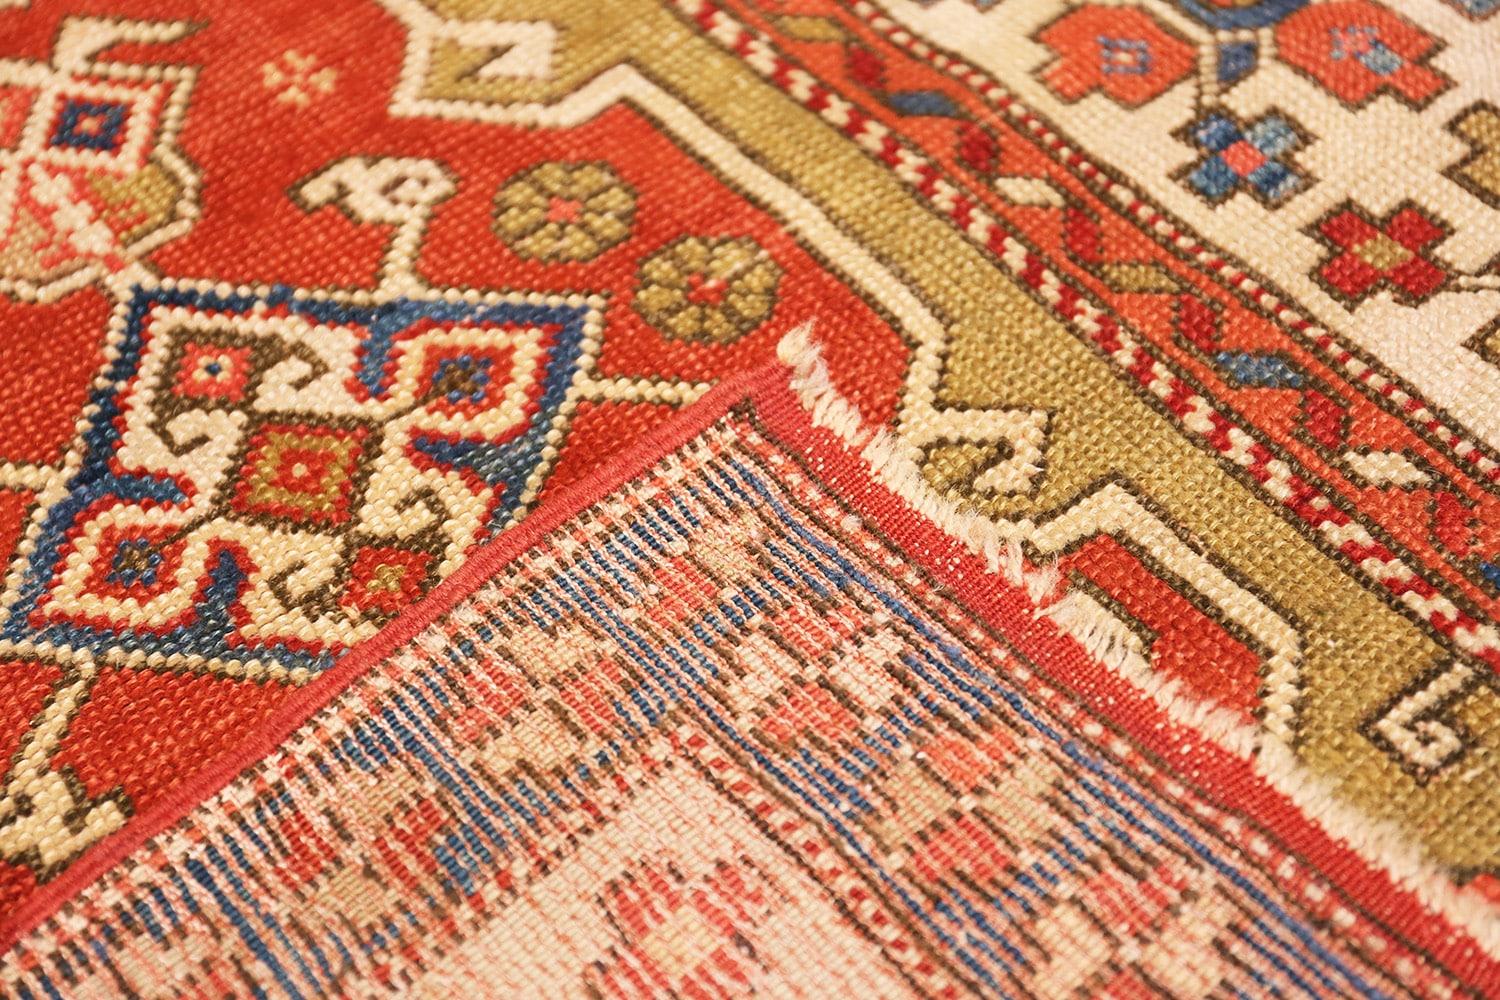 Wool Tribal Antique Turkish Bergama Rug. Size: 3 ft x 4 ft 6 in (0.91 m x 1.37 m)